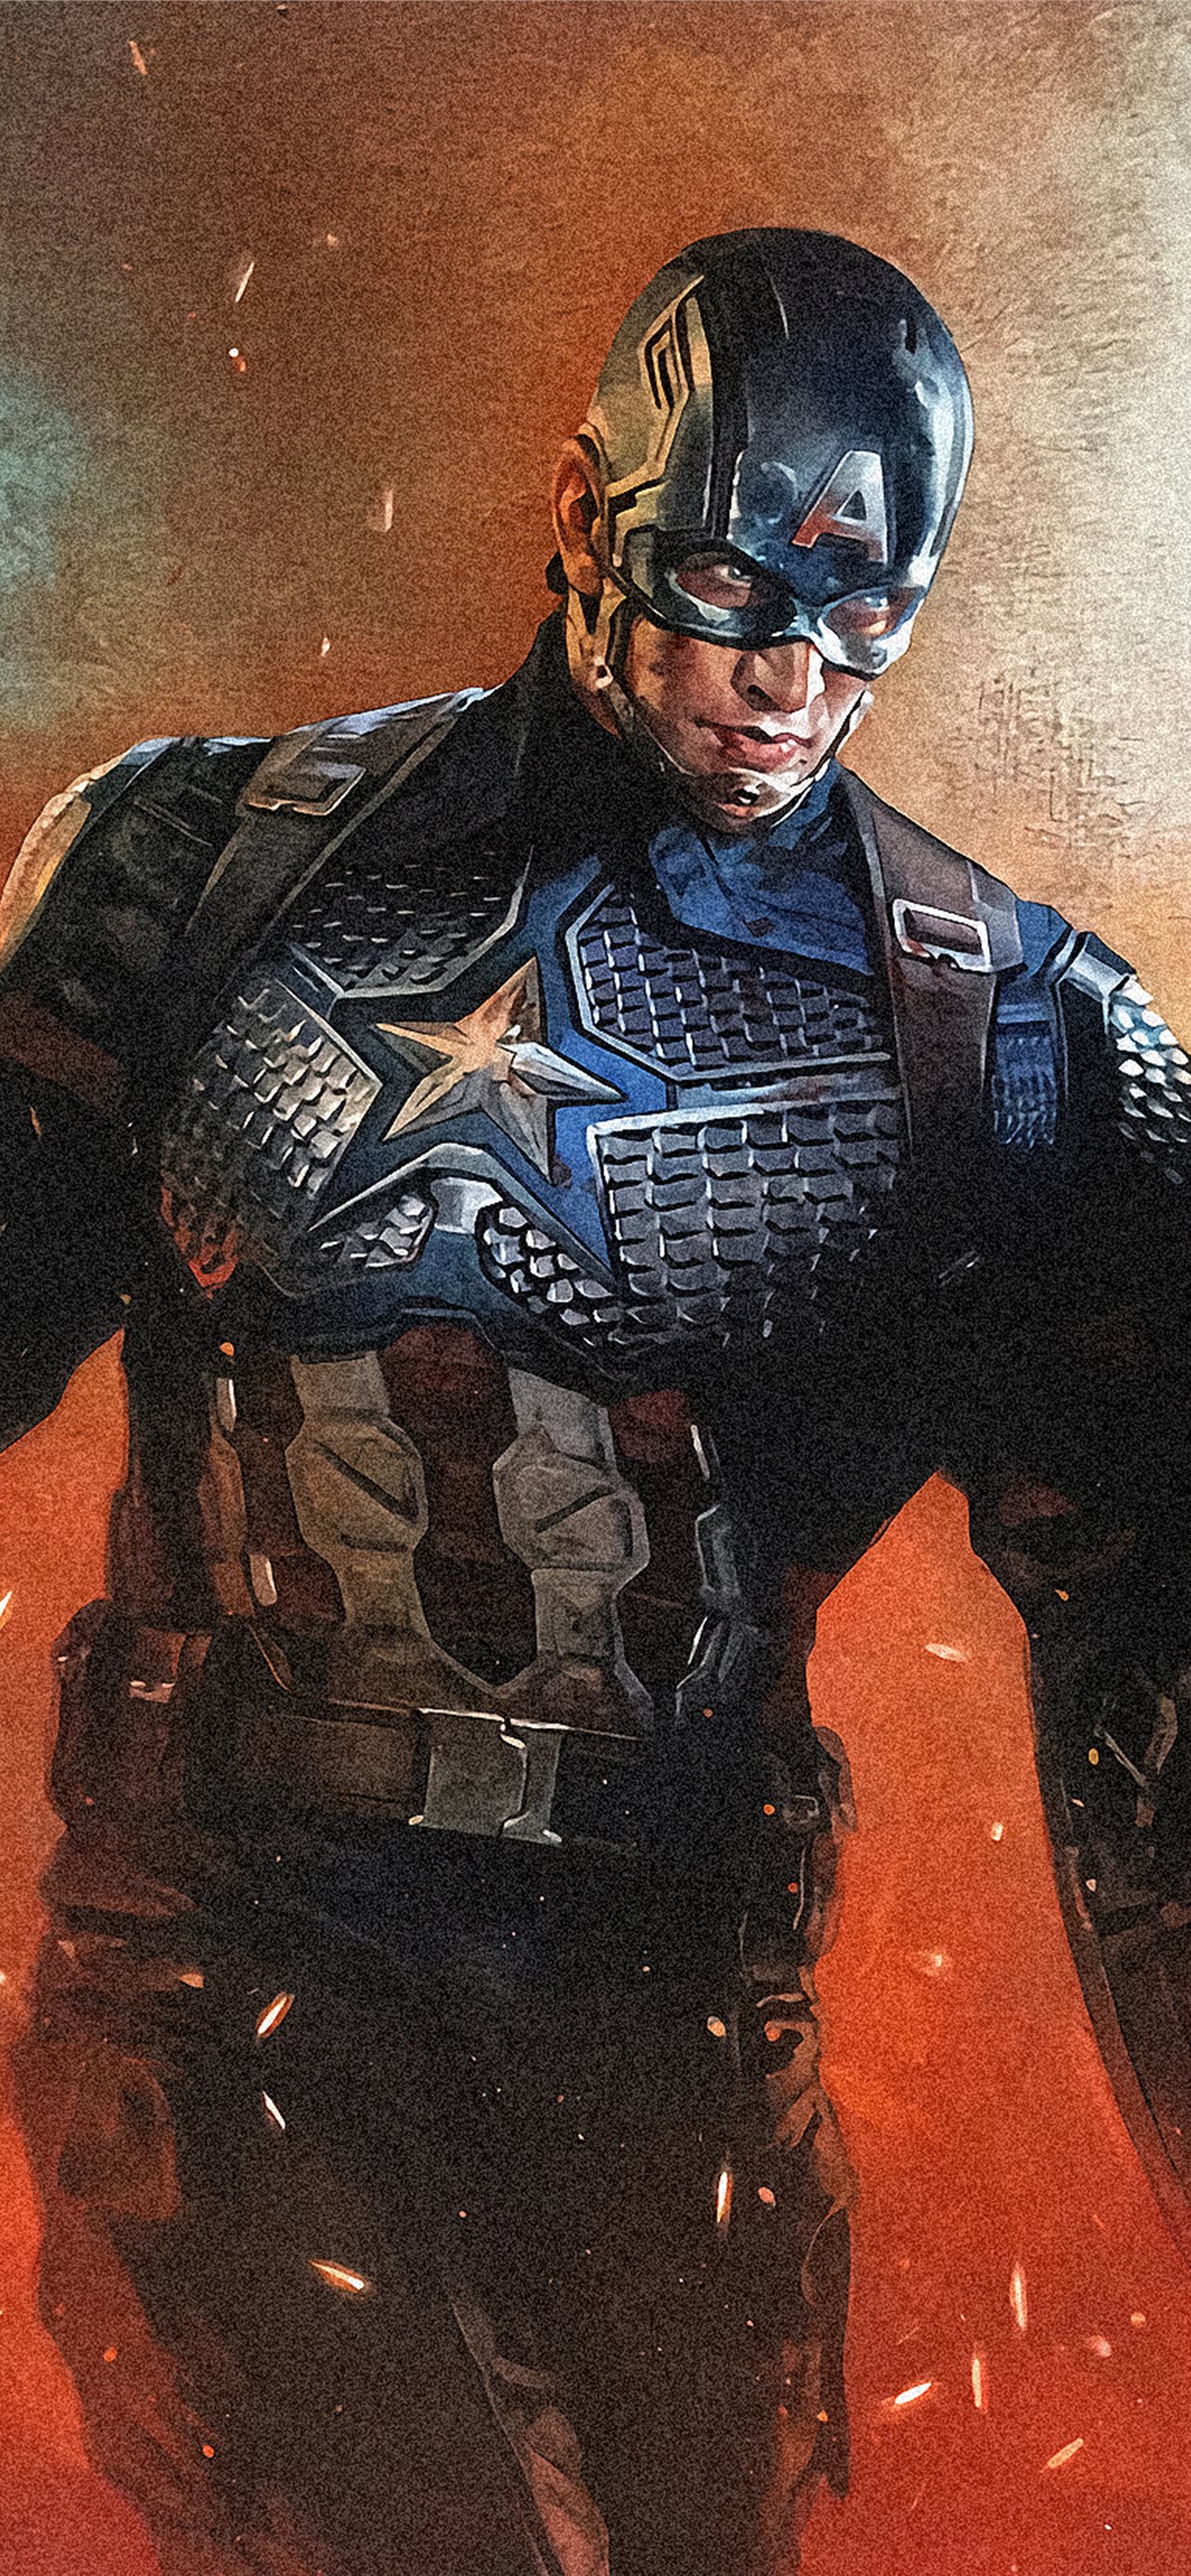 2160x1656 Captain America Mjolnir Wallpaper Background Image View  download comment a  Captain america shield tattoo Marvel captain  america Iron man avengers